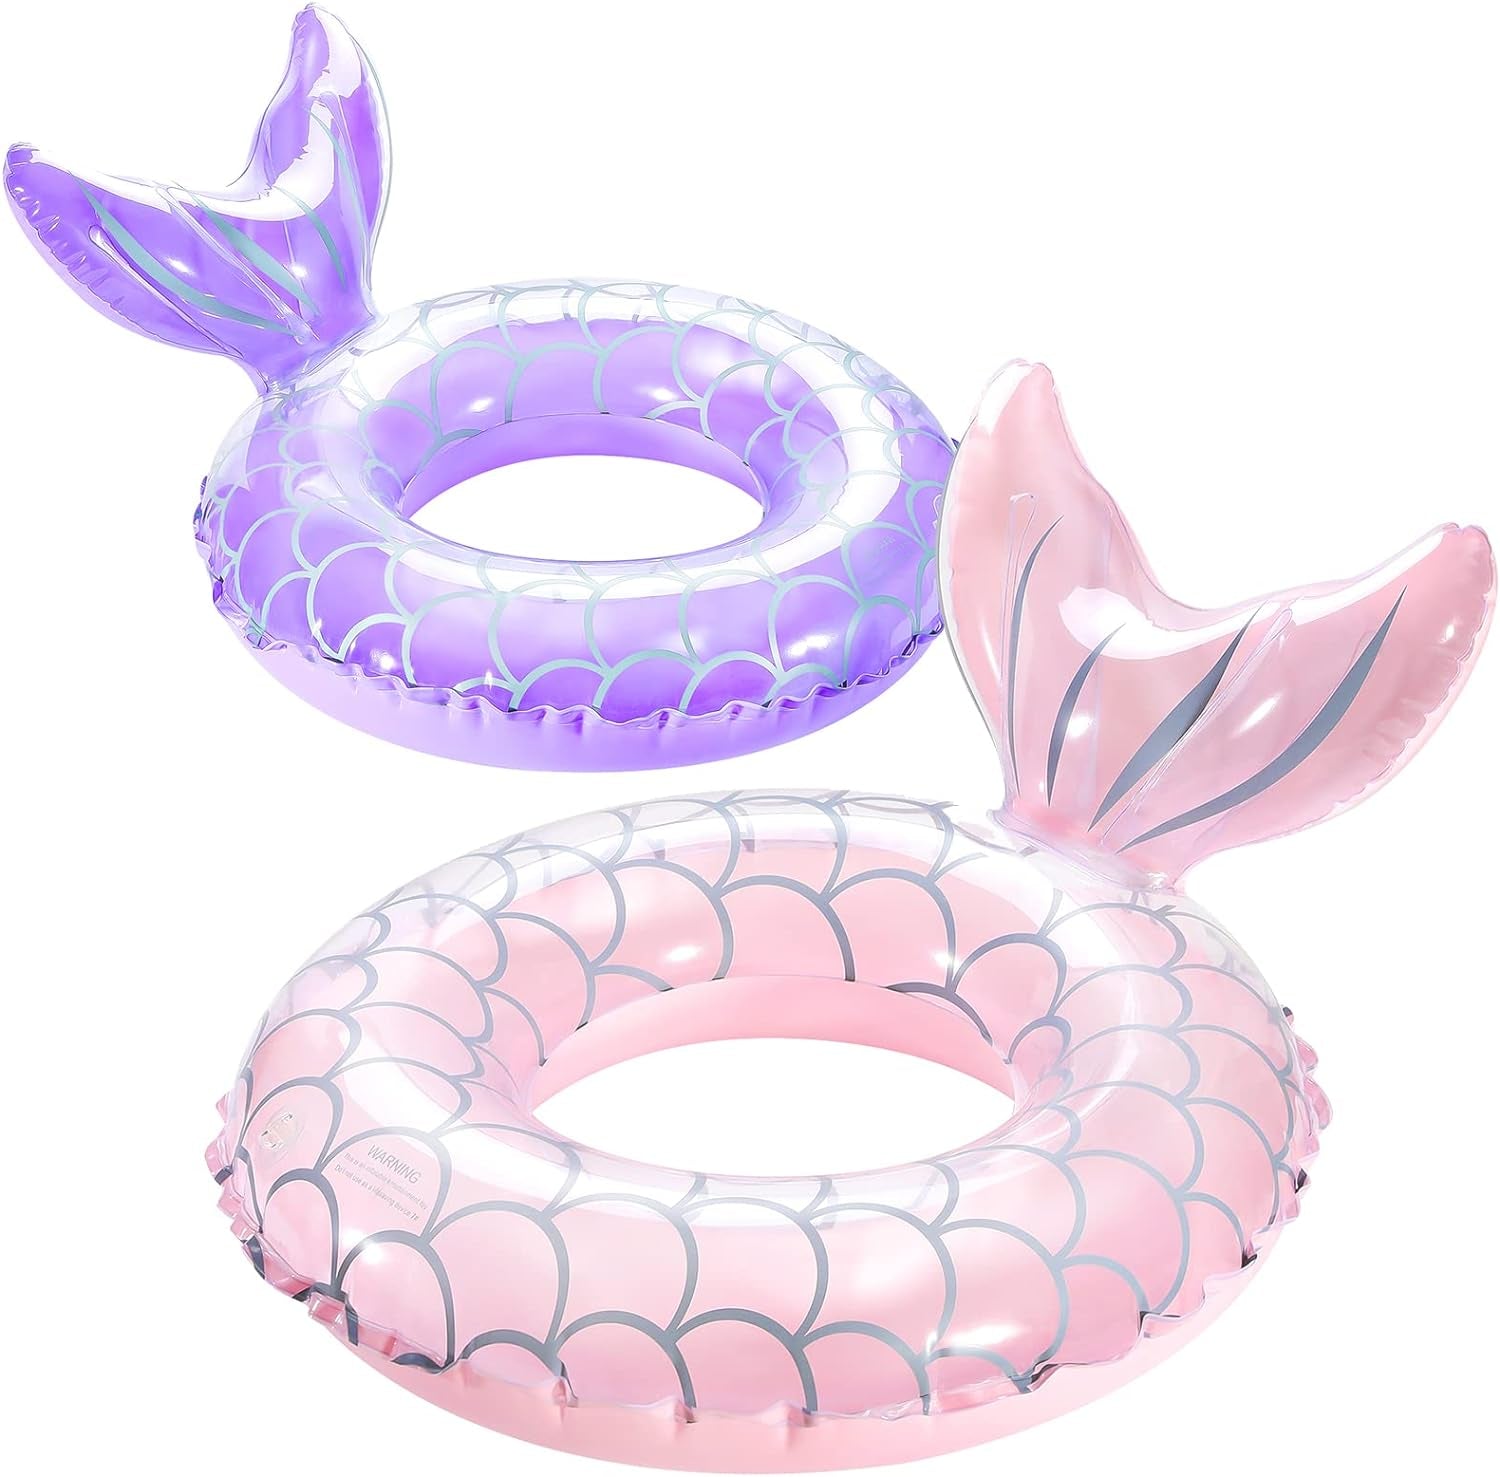 Mermaid Pool Float, Mermaid Tail Shaped Pool Swimming Float Tube Ring Floatie, Summer Water Fun Beach Party Swimming Pool Toys for Kids Children Adults Water Activities, Rose Gold